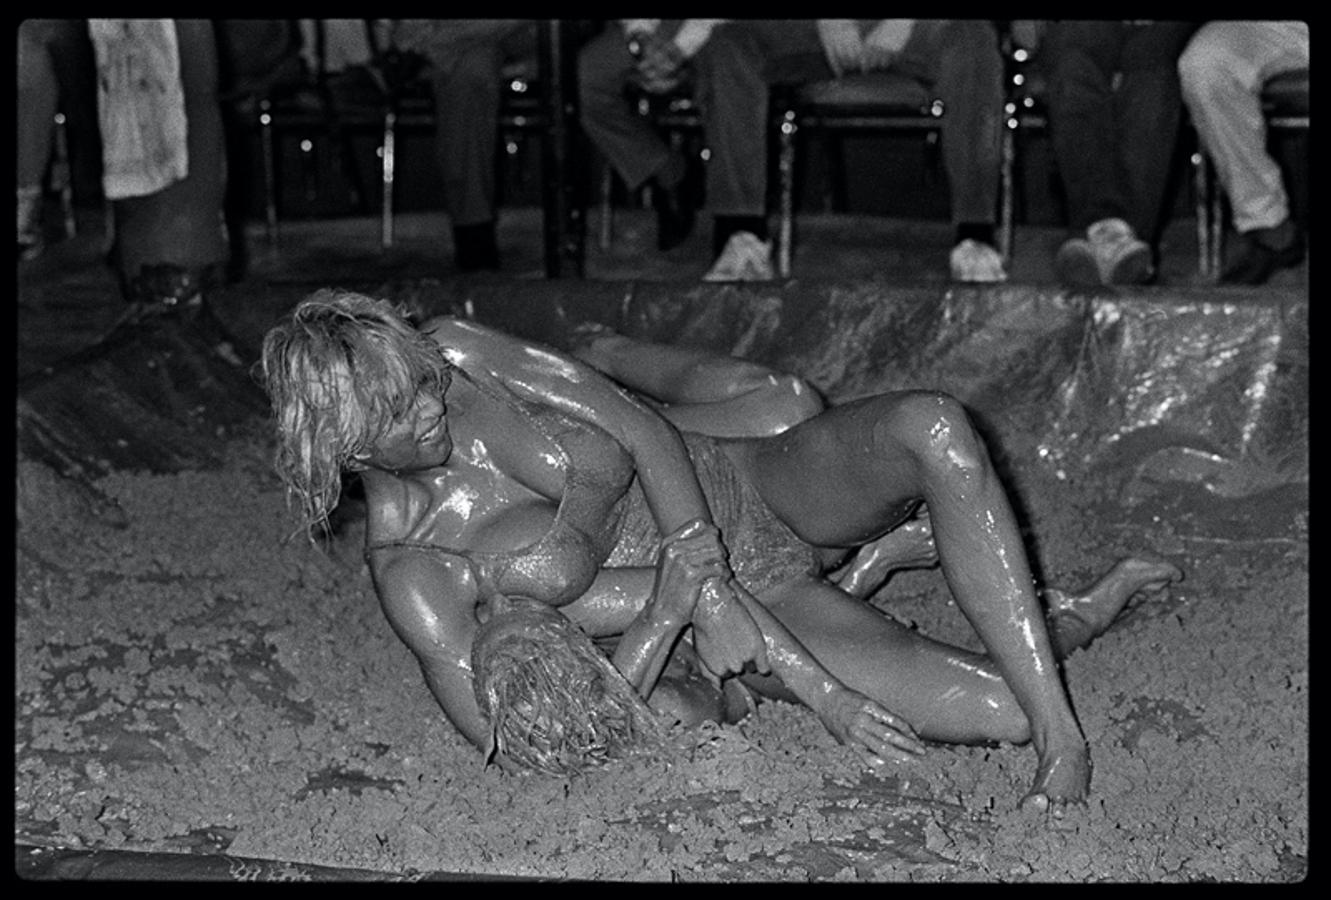 Catfight IV 
by Arthur Steel

Catfight – Female Bikini Mud Wrestlers, Hollywood Tropicana, Los Angeles 1985 – Set of 6 prints.

Arthur recalls:
“I was in Los Angeles with the British cricketer Ian Botham, as he was hoping to forge a career as a